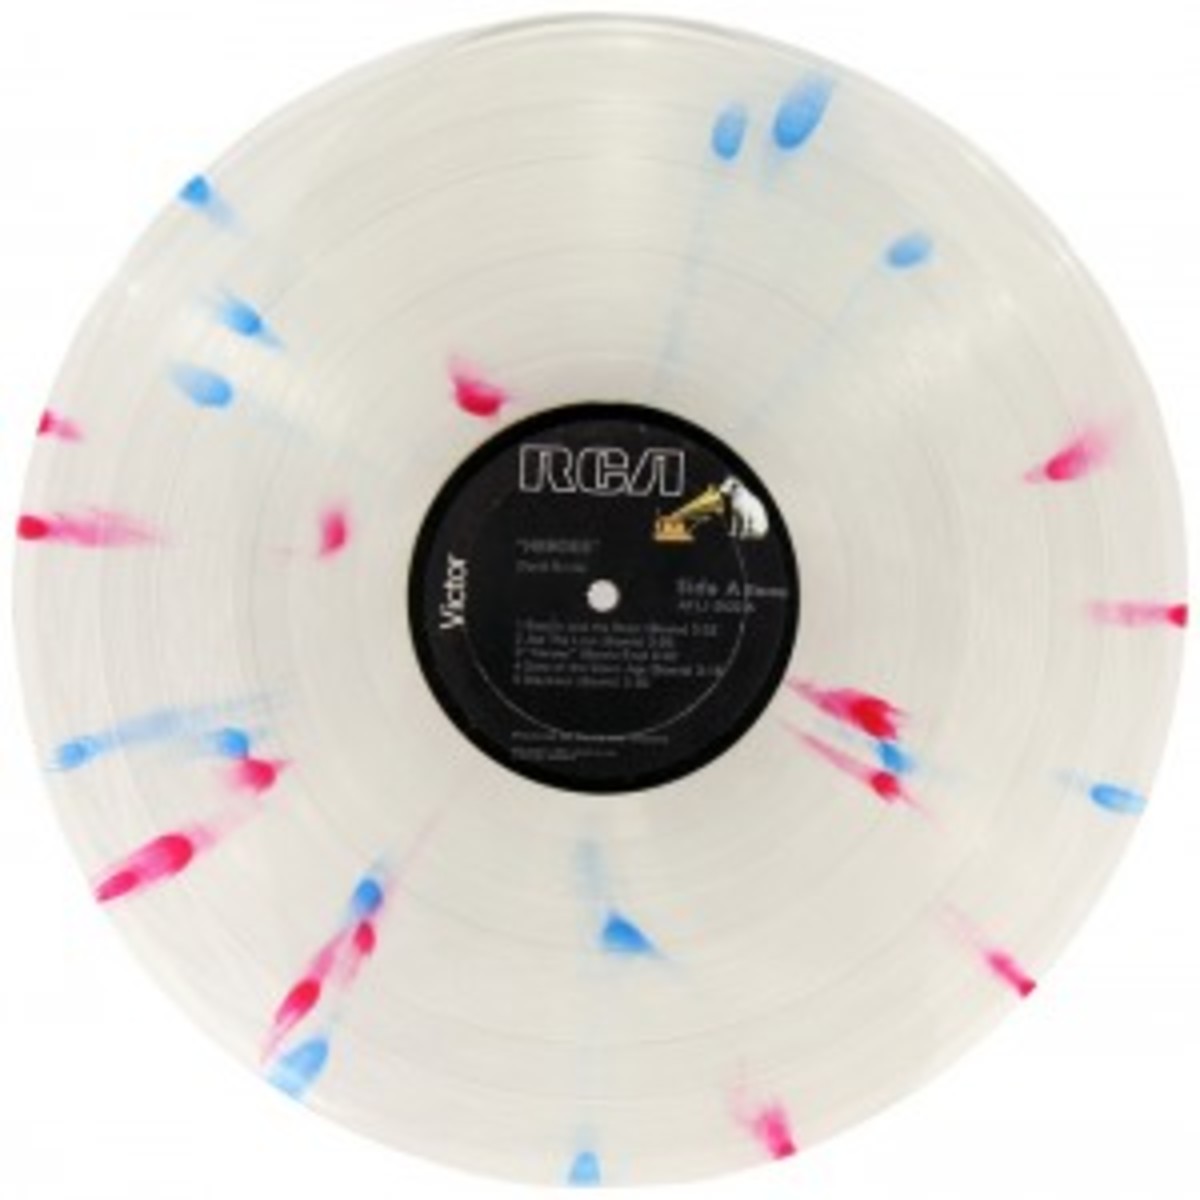 The only existing multi-color vinyl pressing of David Bowie’s “Heroes” on RCA. 